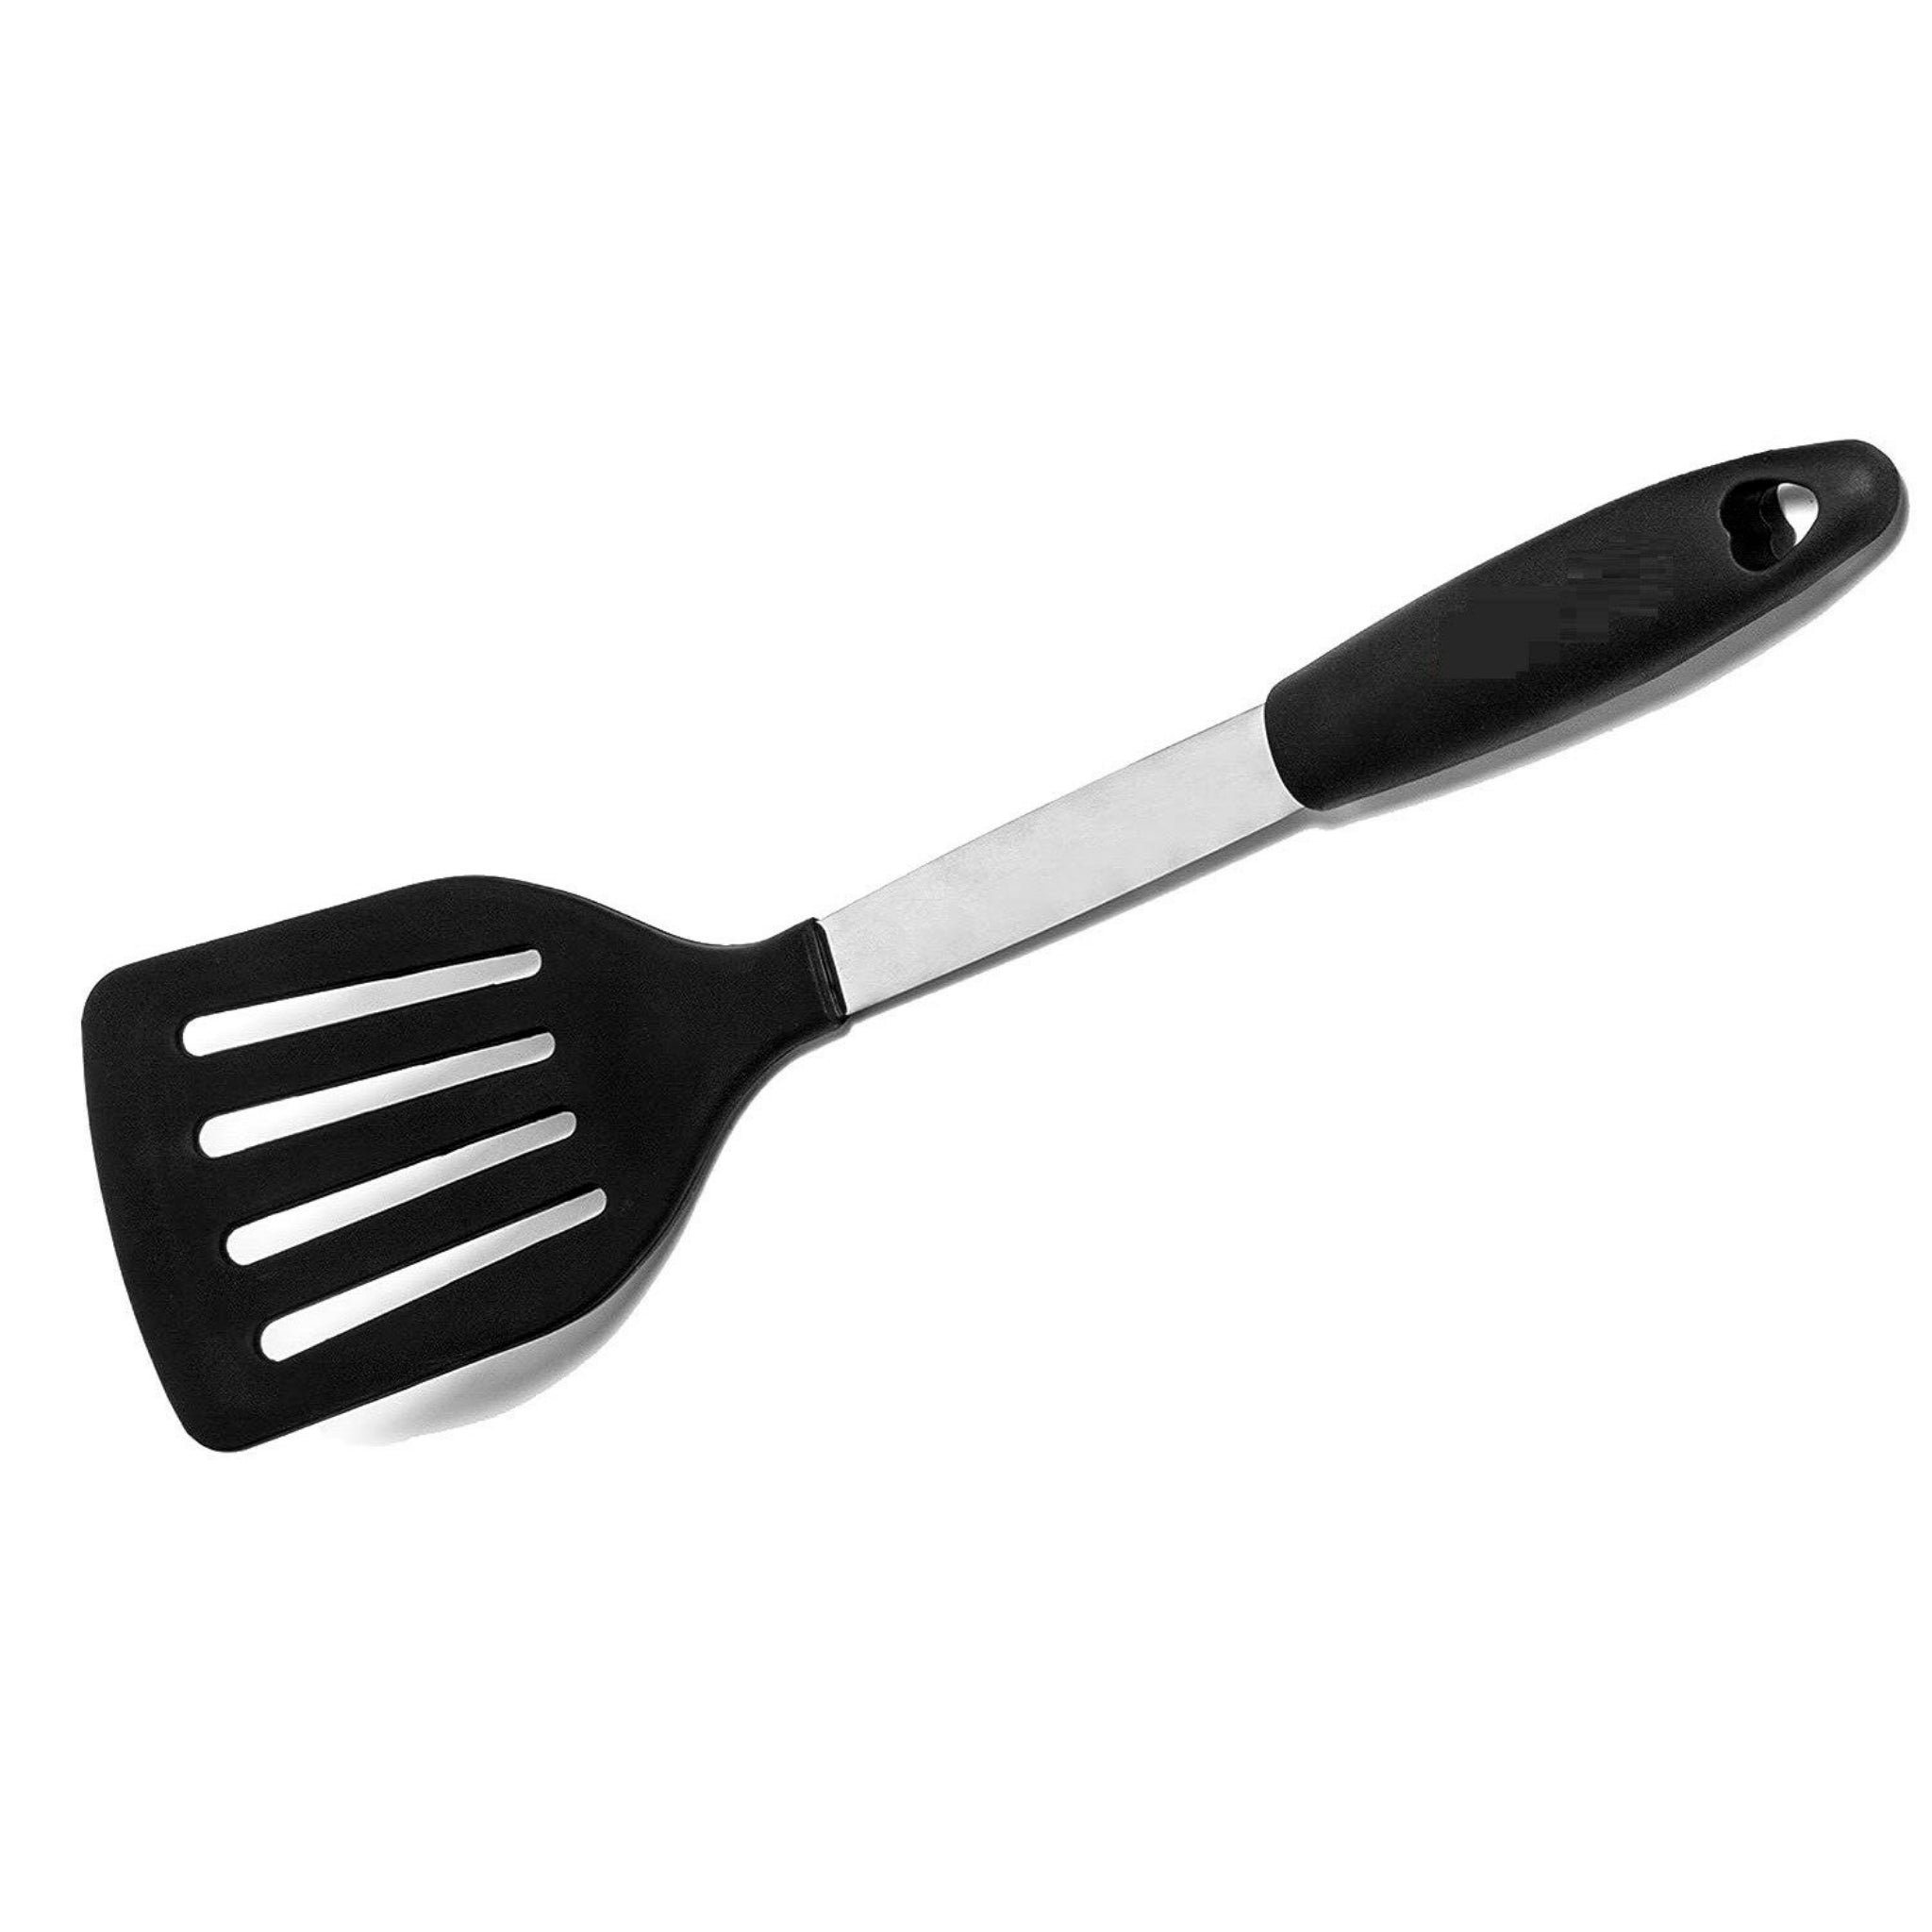 Beclen Harp 32cm Nylon Non Stick Solid And Slotted Turner/Flipper Heat Resistant Spatula-Perfect Kitchen/Cooking Companion Tool